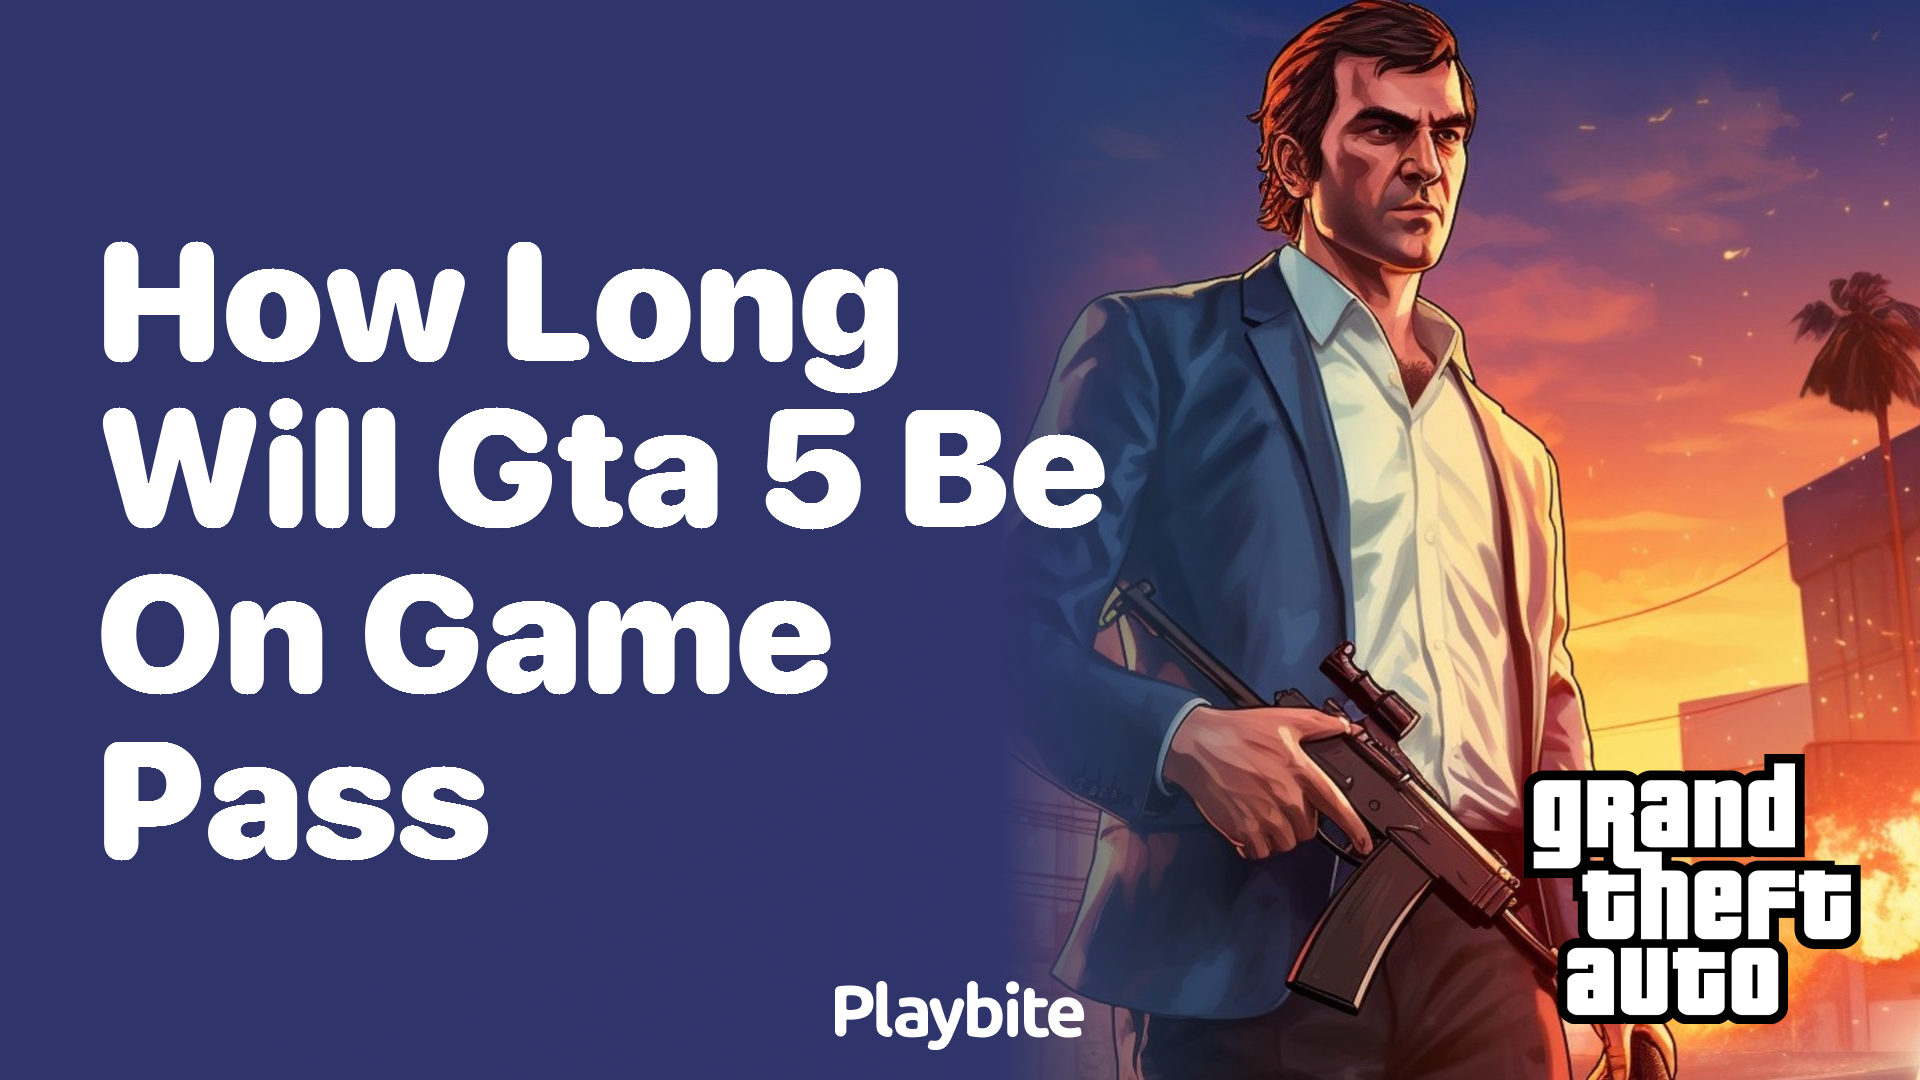 How long will GTA V be on Game Pass?